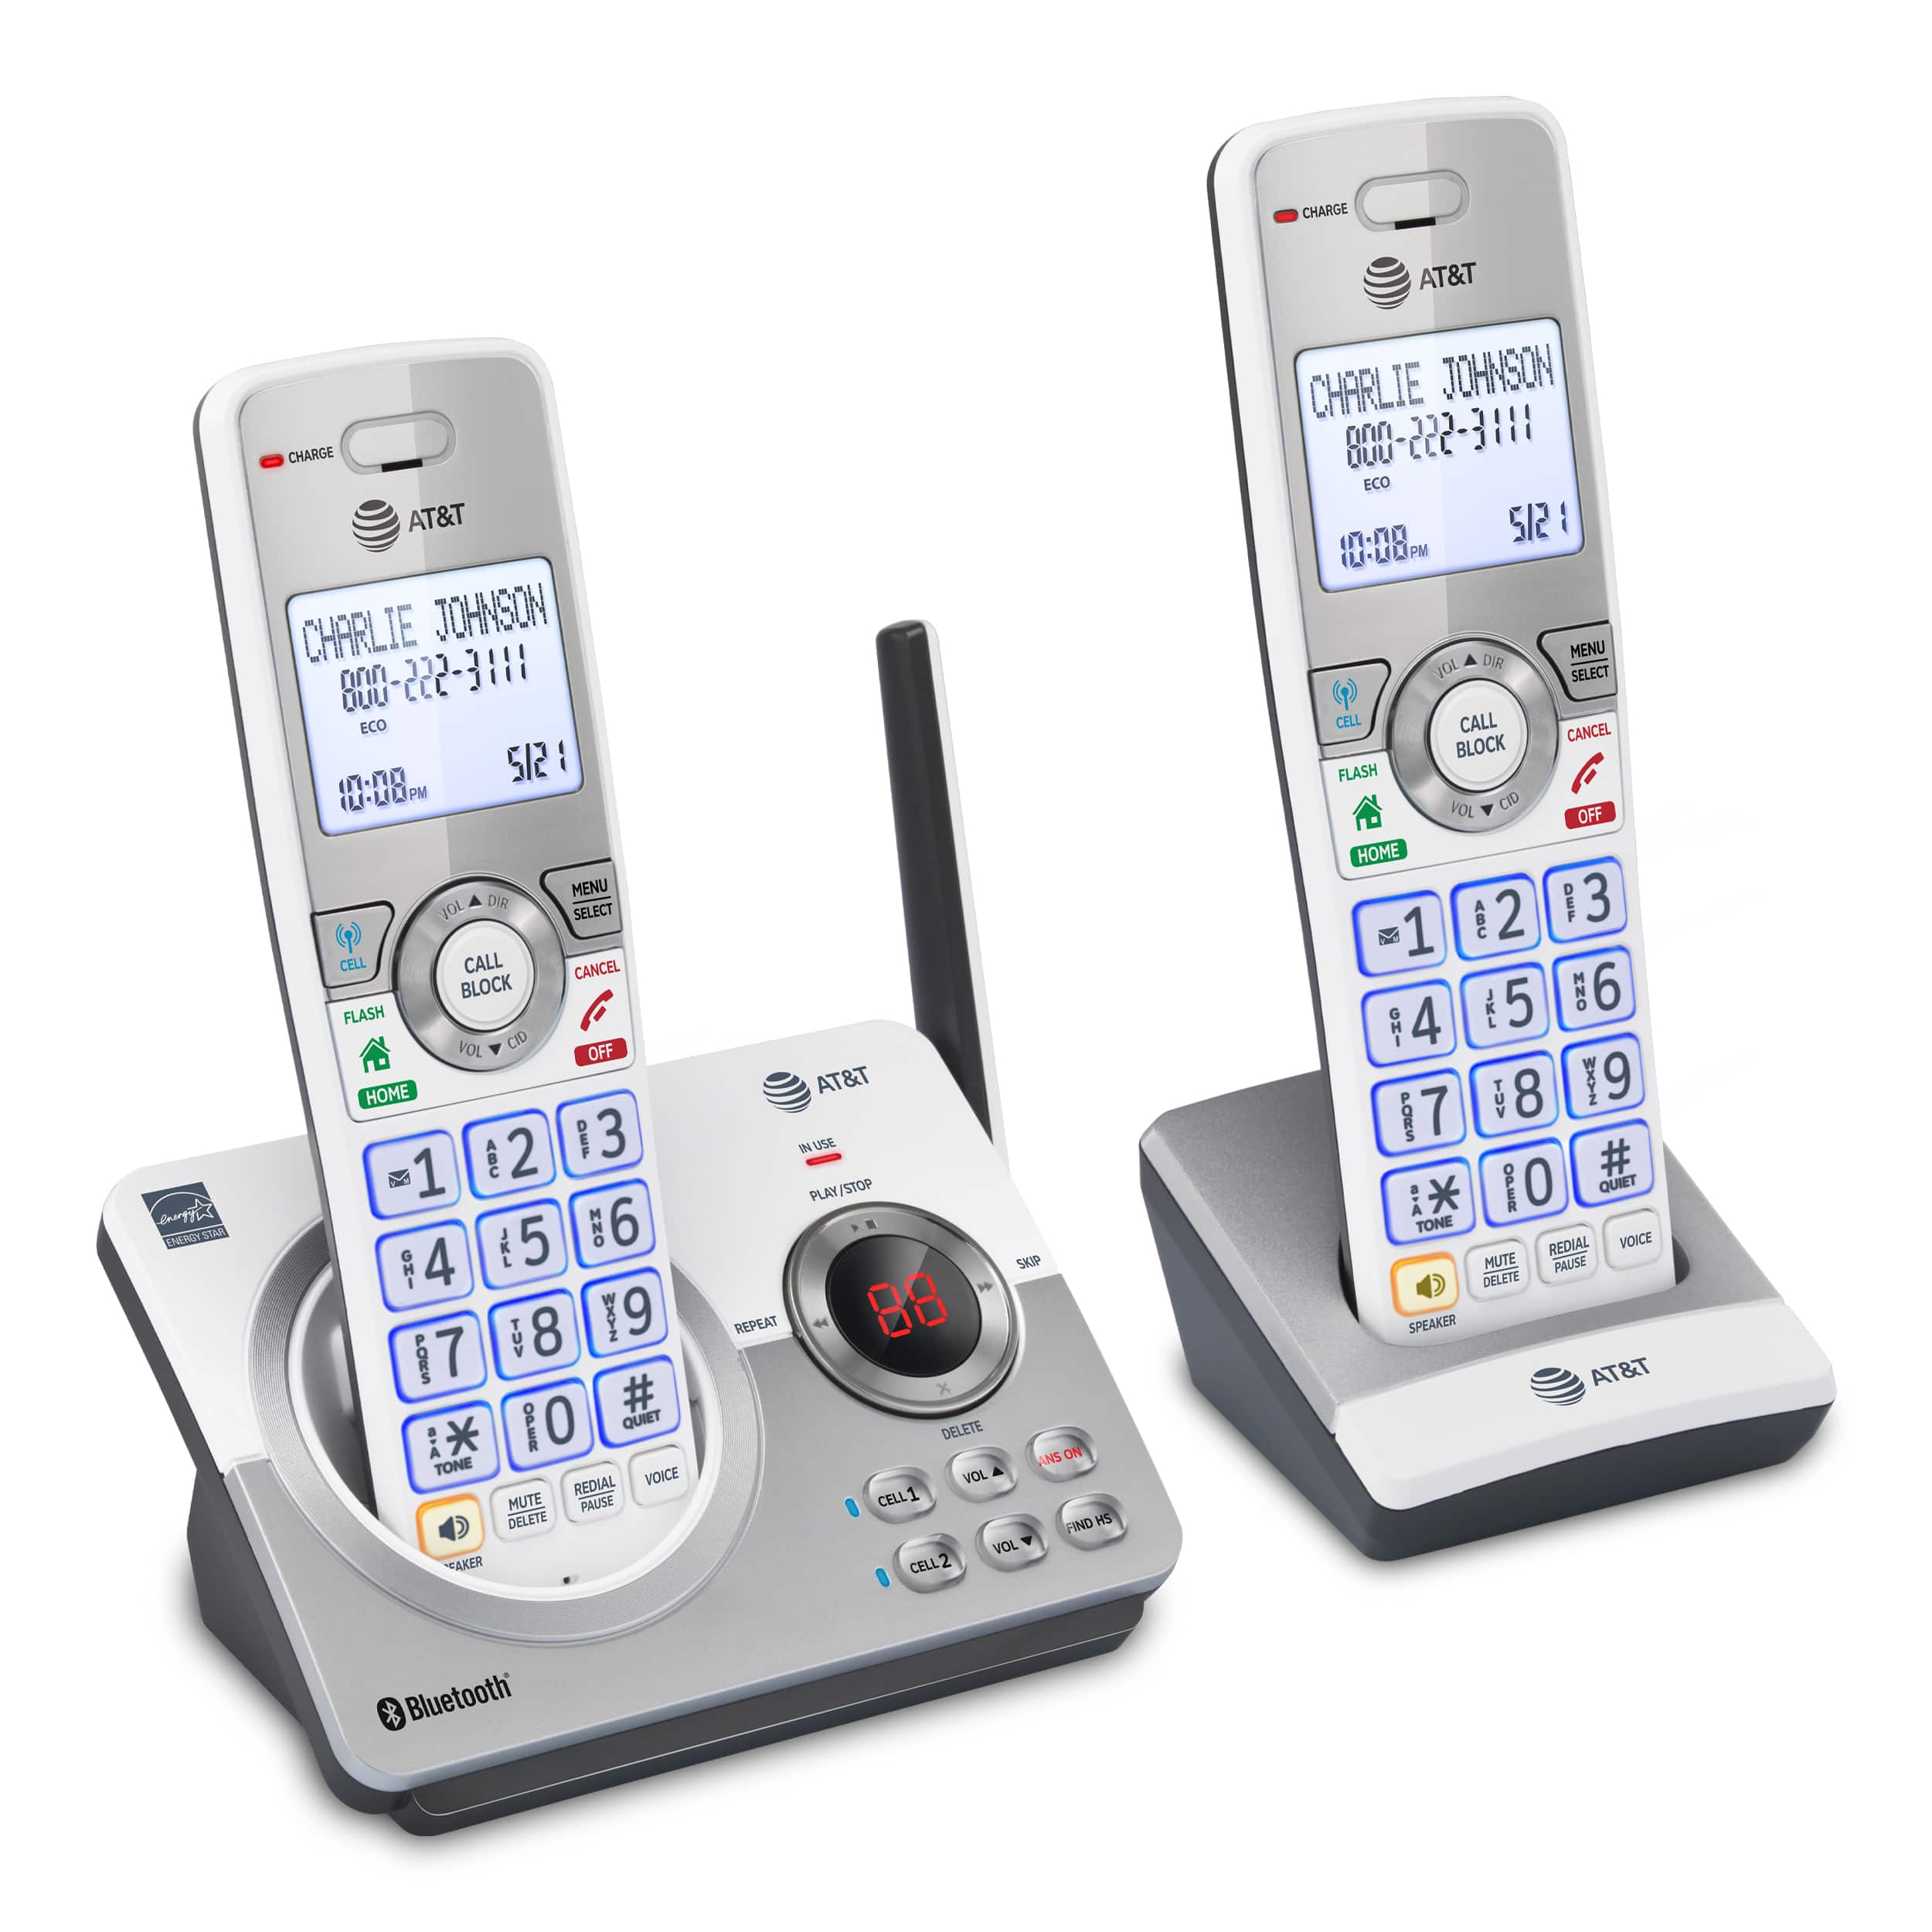 2-Handset Expandable Cordless Phone with Unsurpassed Range, Bluetooth Connect to Cell™, Smart Call Blocker and Answering System, DL72210 - view 2